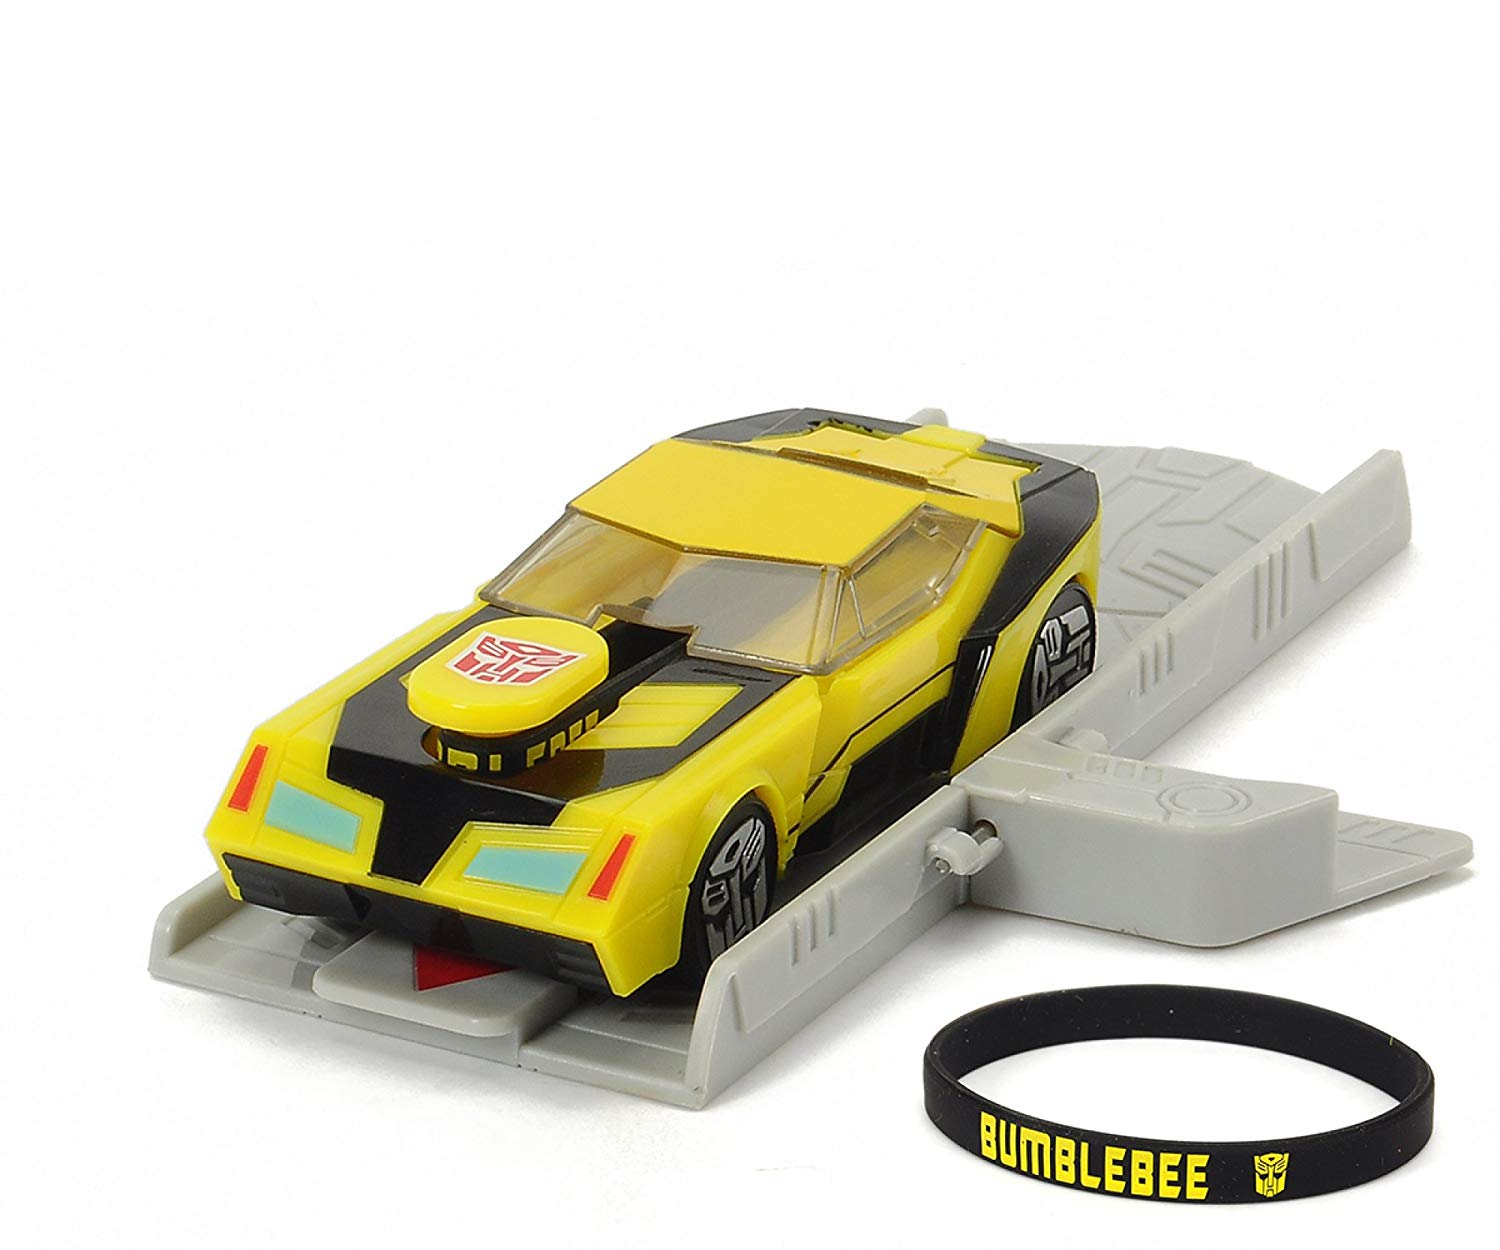 Dickie Toys 203112001 Mission Racer Bumblebee – Transformers Vehicles, 11 c